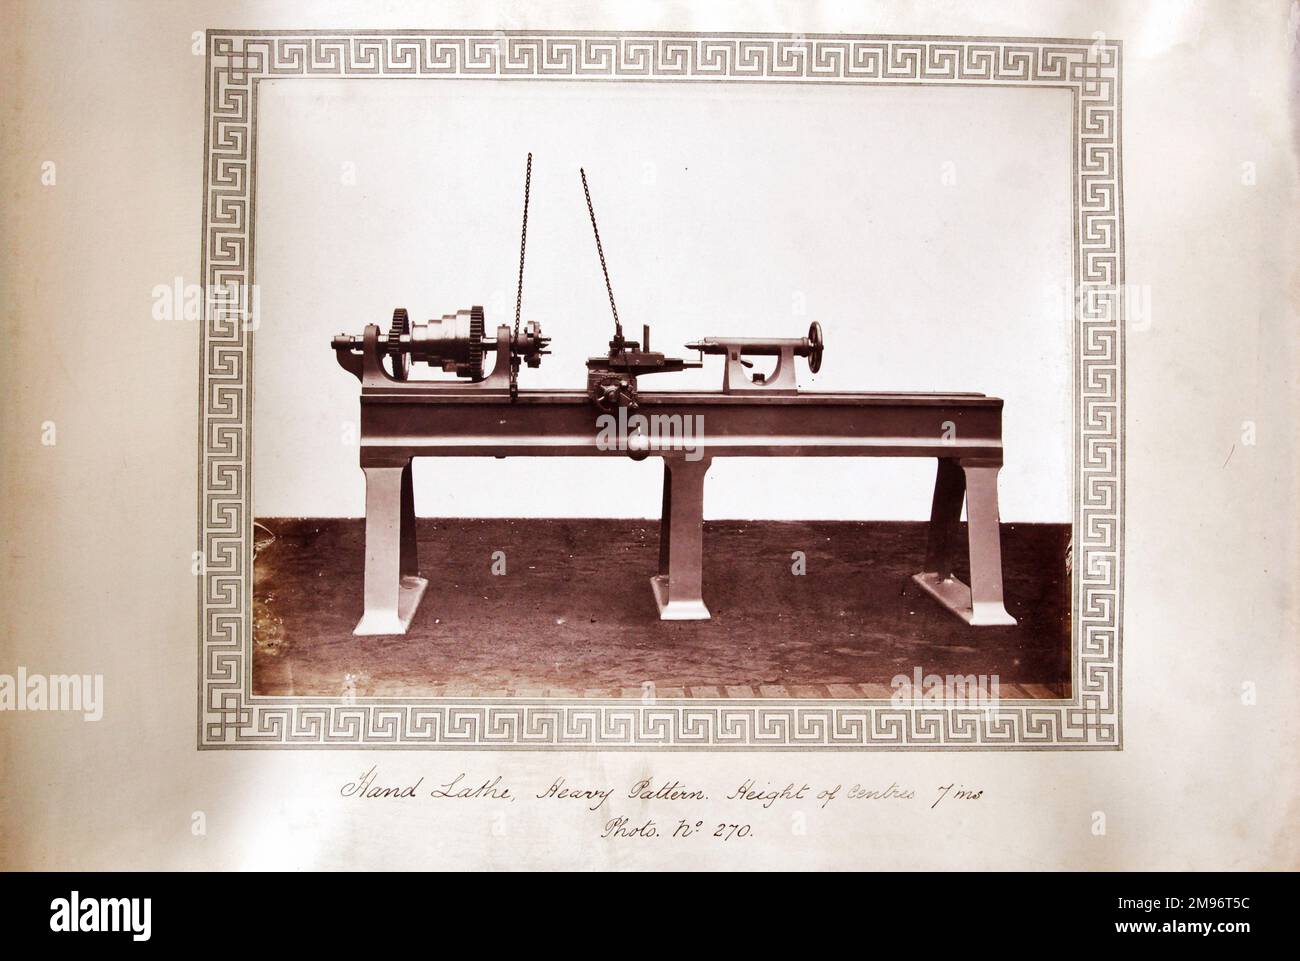 Hand lathe, heavy pattern.  Height of centres 7 inches Stock Photo